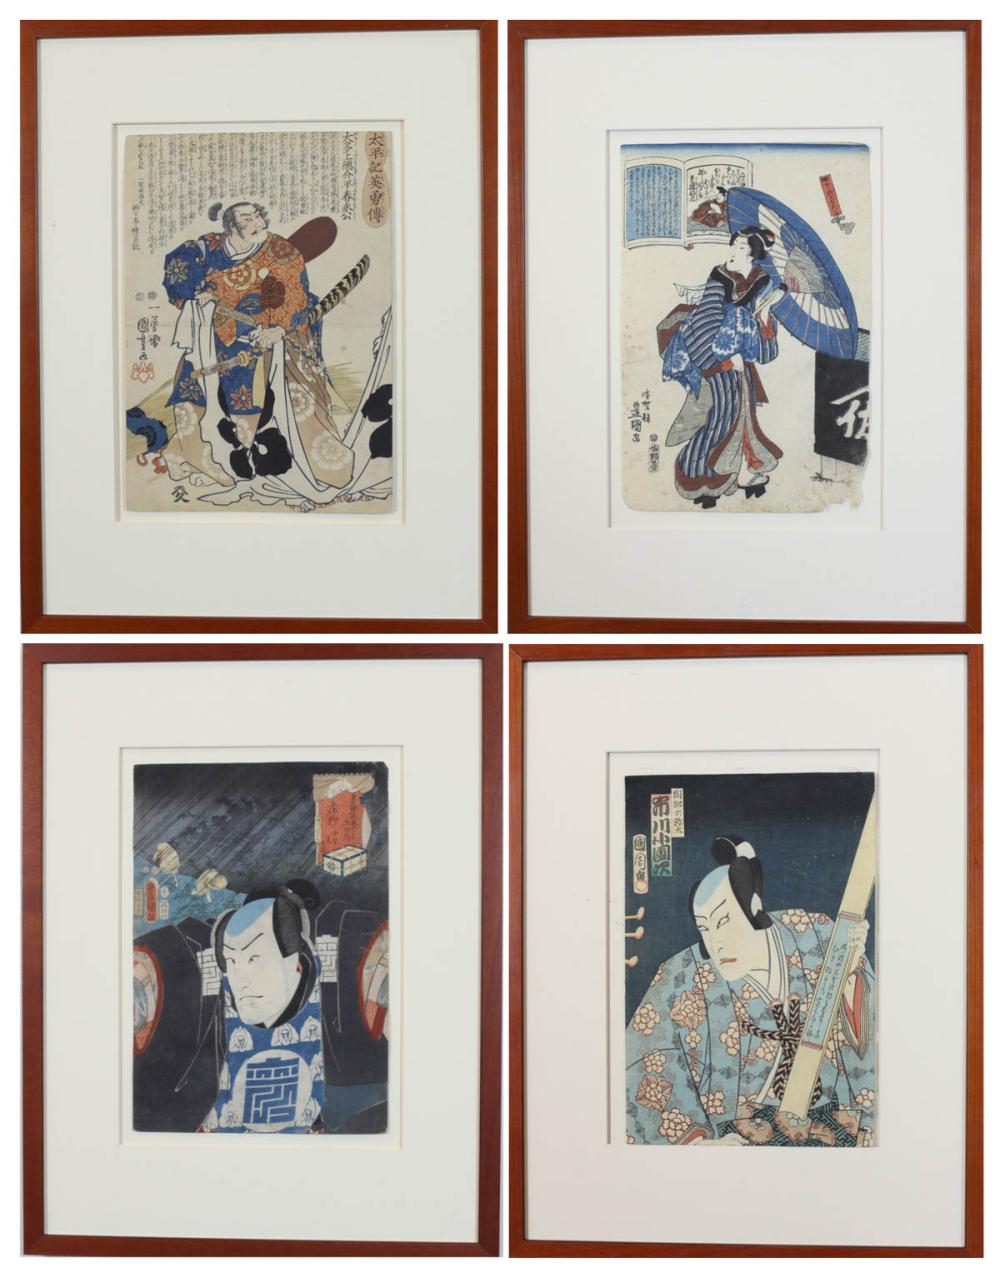 FOUR JAPANESE WOODCUTS: TWO WOODCUTS